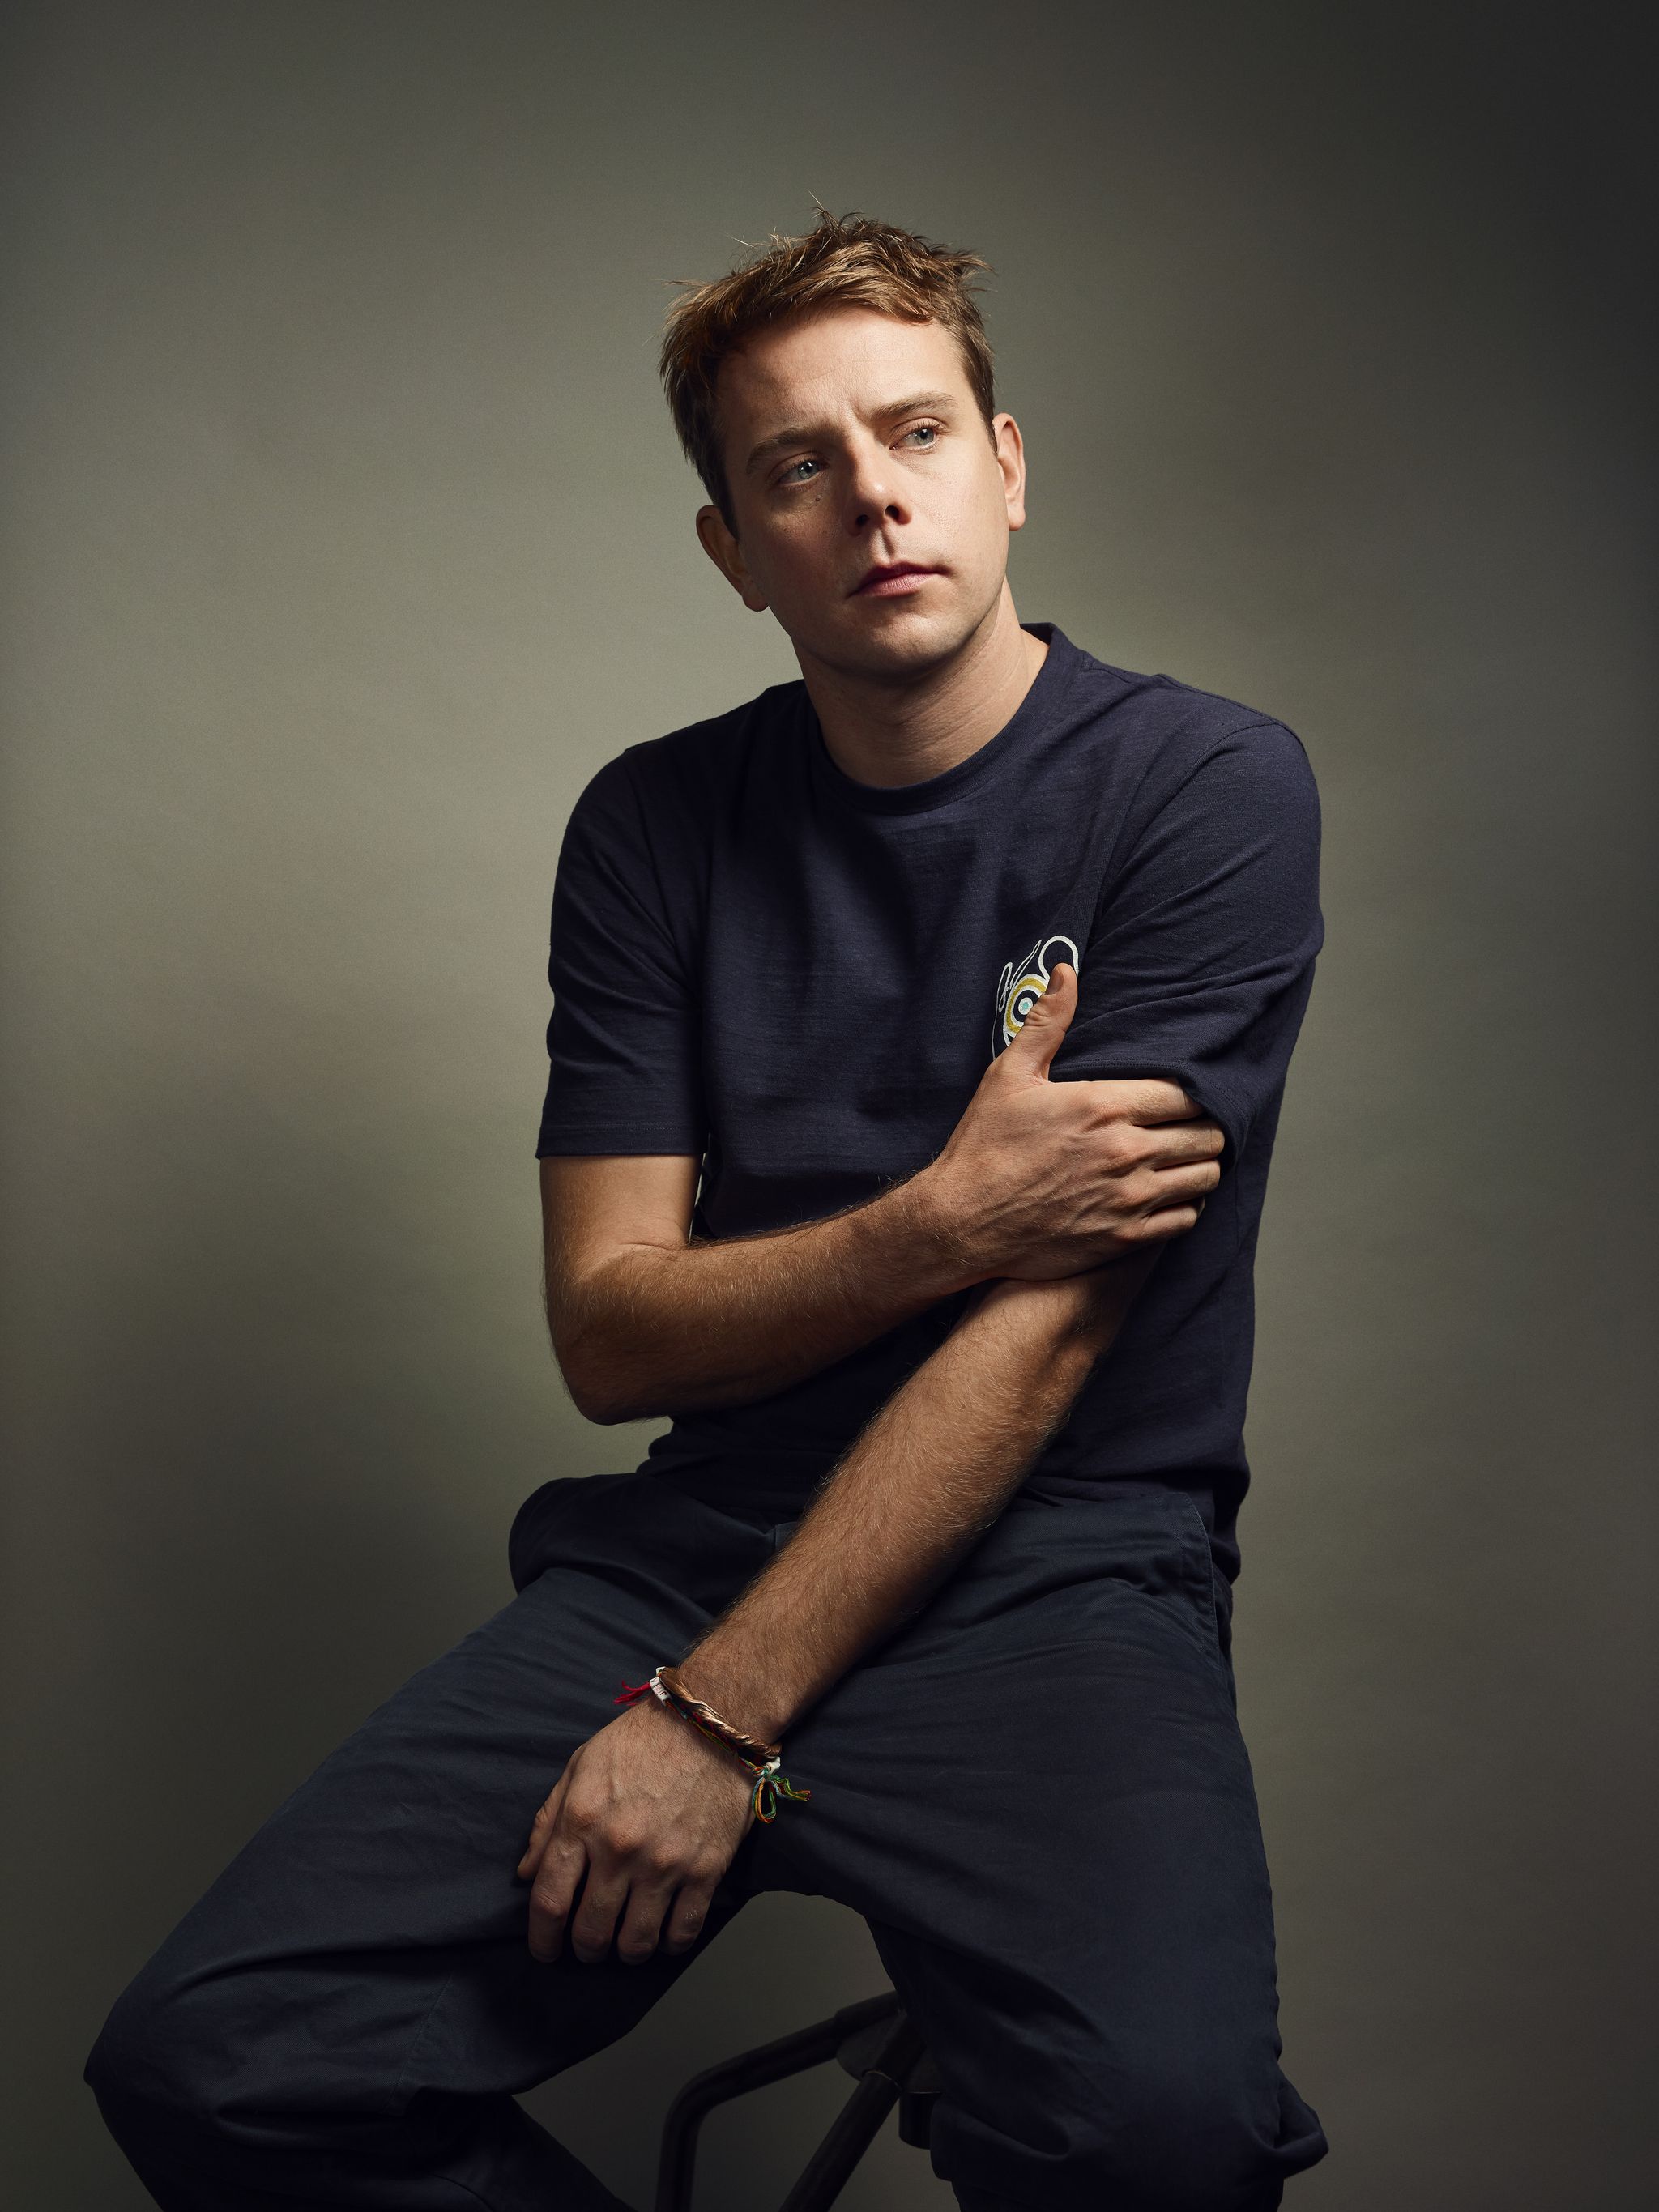 JW Anderson: 'The minute your brand can be predicted, you've got a